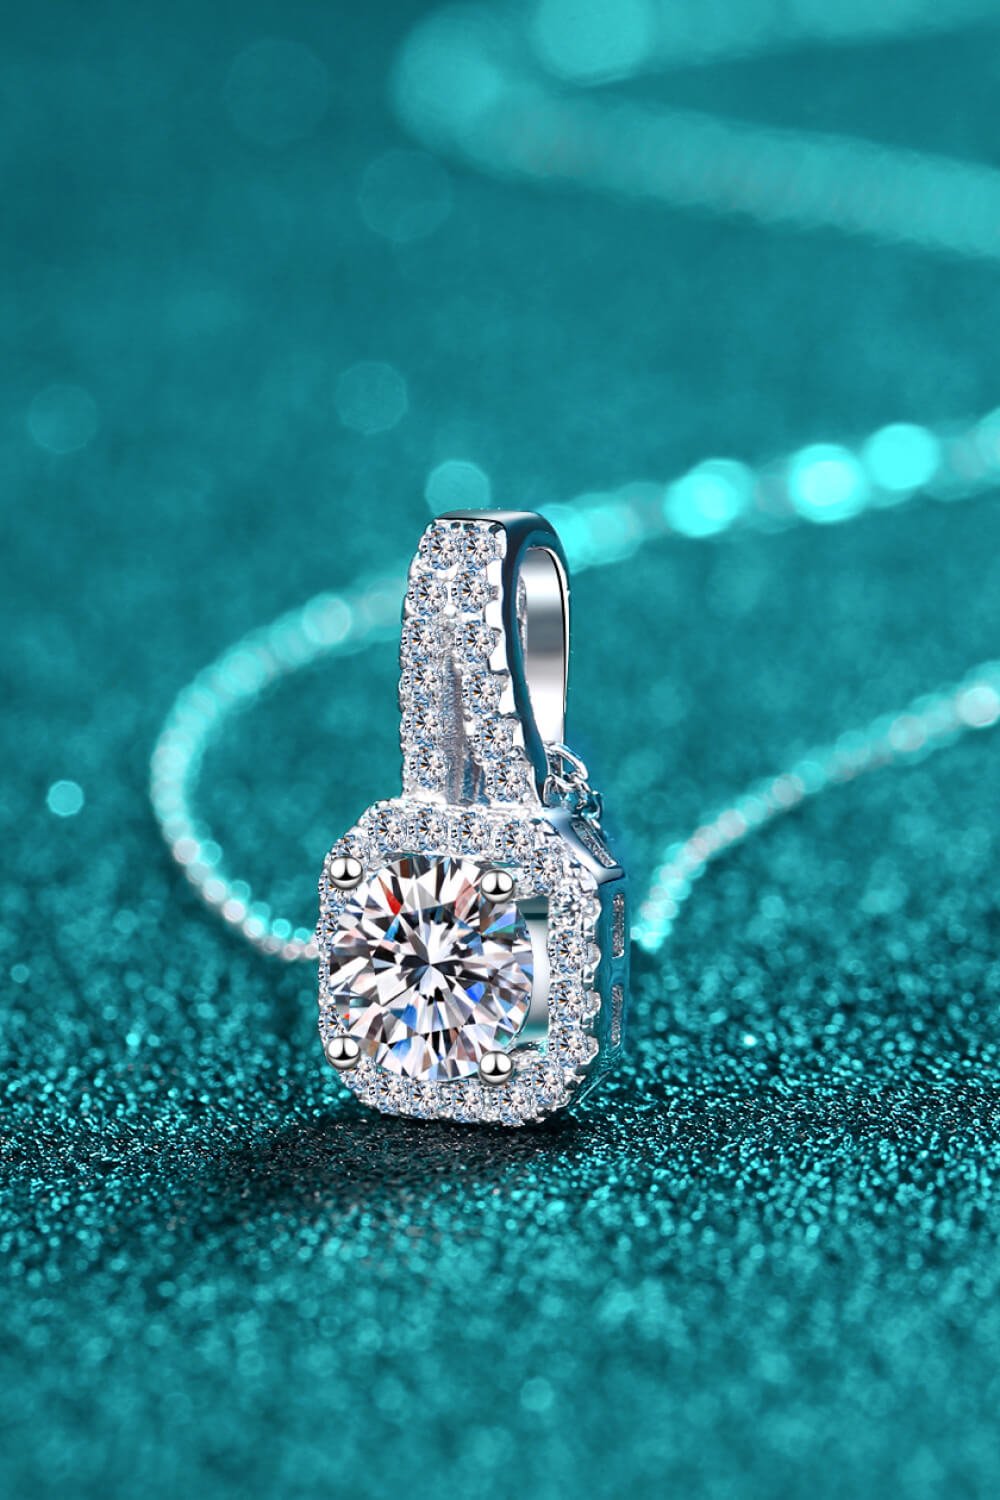 "Enchanting Love: 1 Carat Moissanite Necklace - Experience the Magic of Our Breathtaking Stone and Adorn Your Love with Elegance" - Guy Christopher